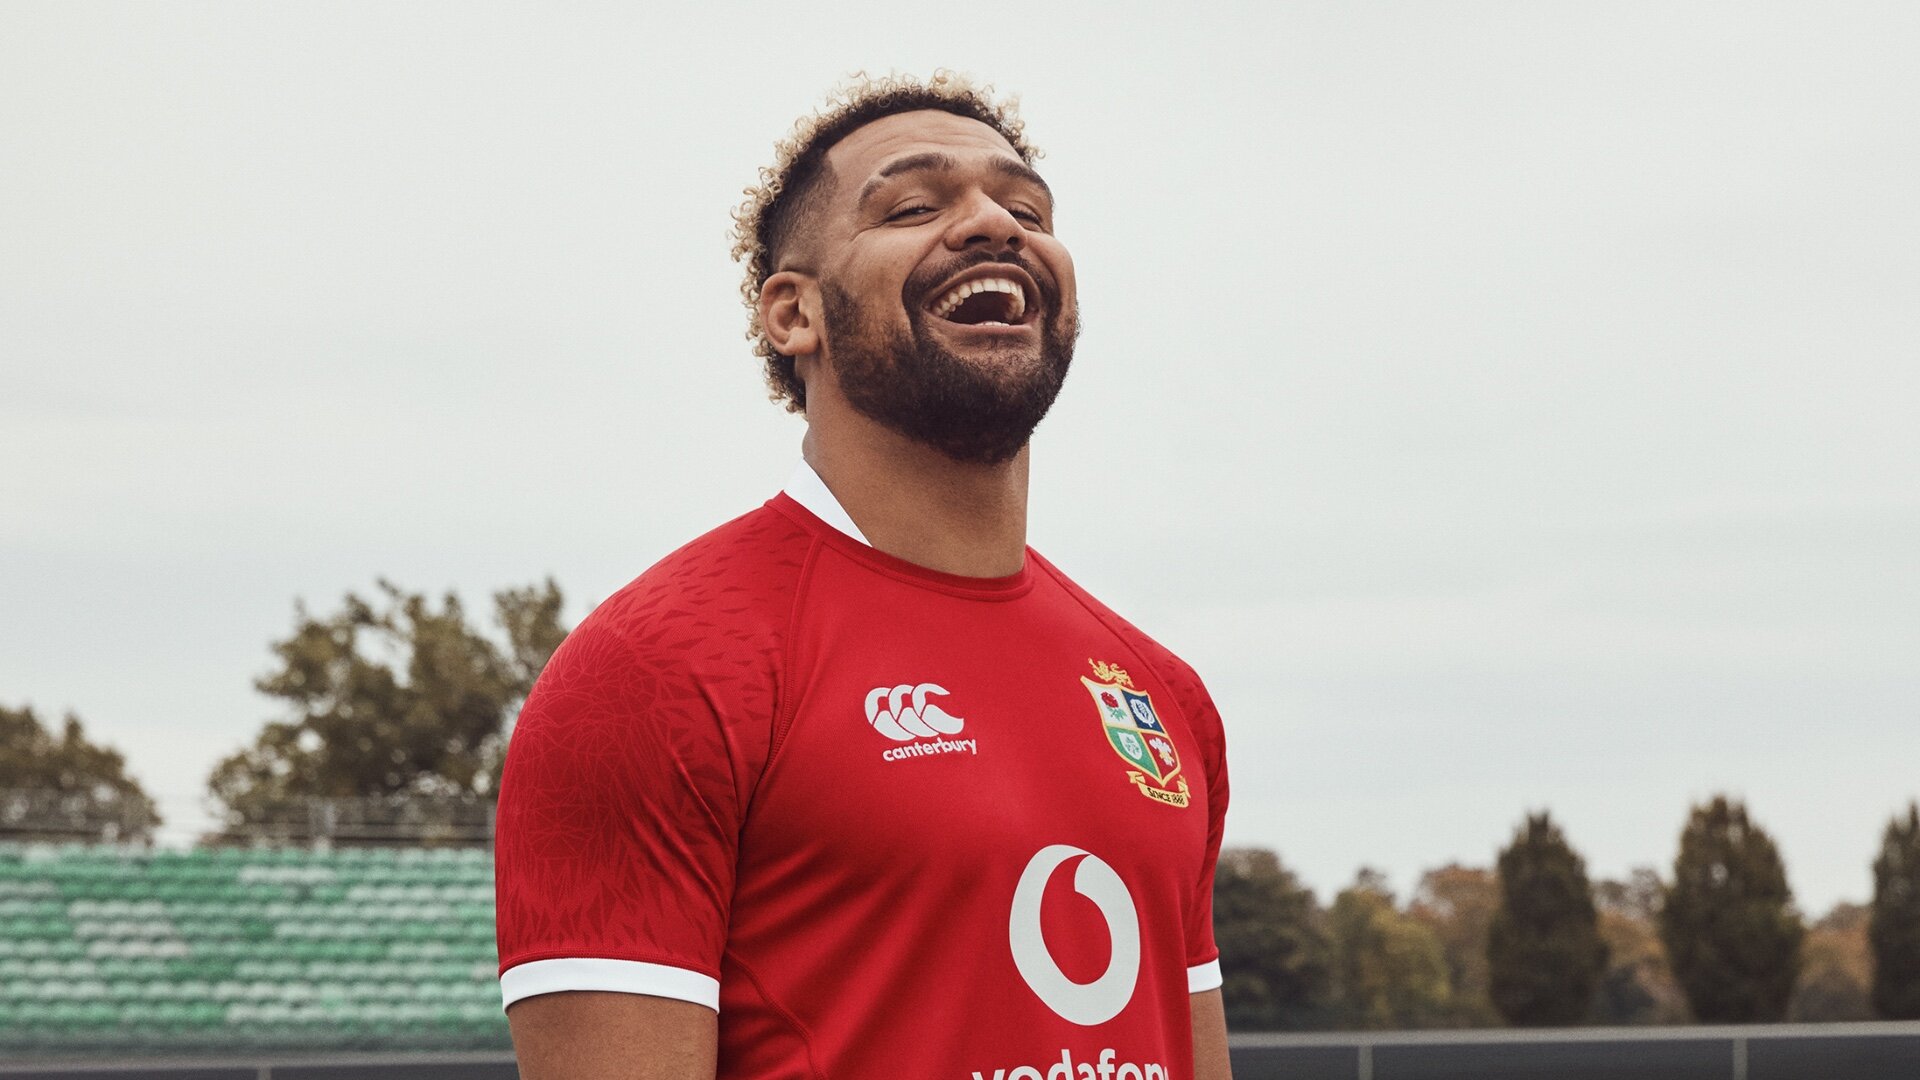 lions 2021 jersey